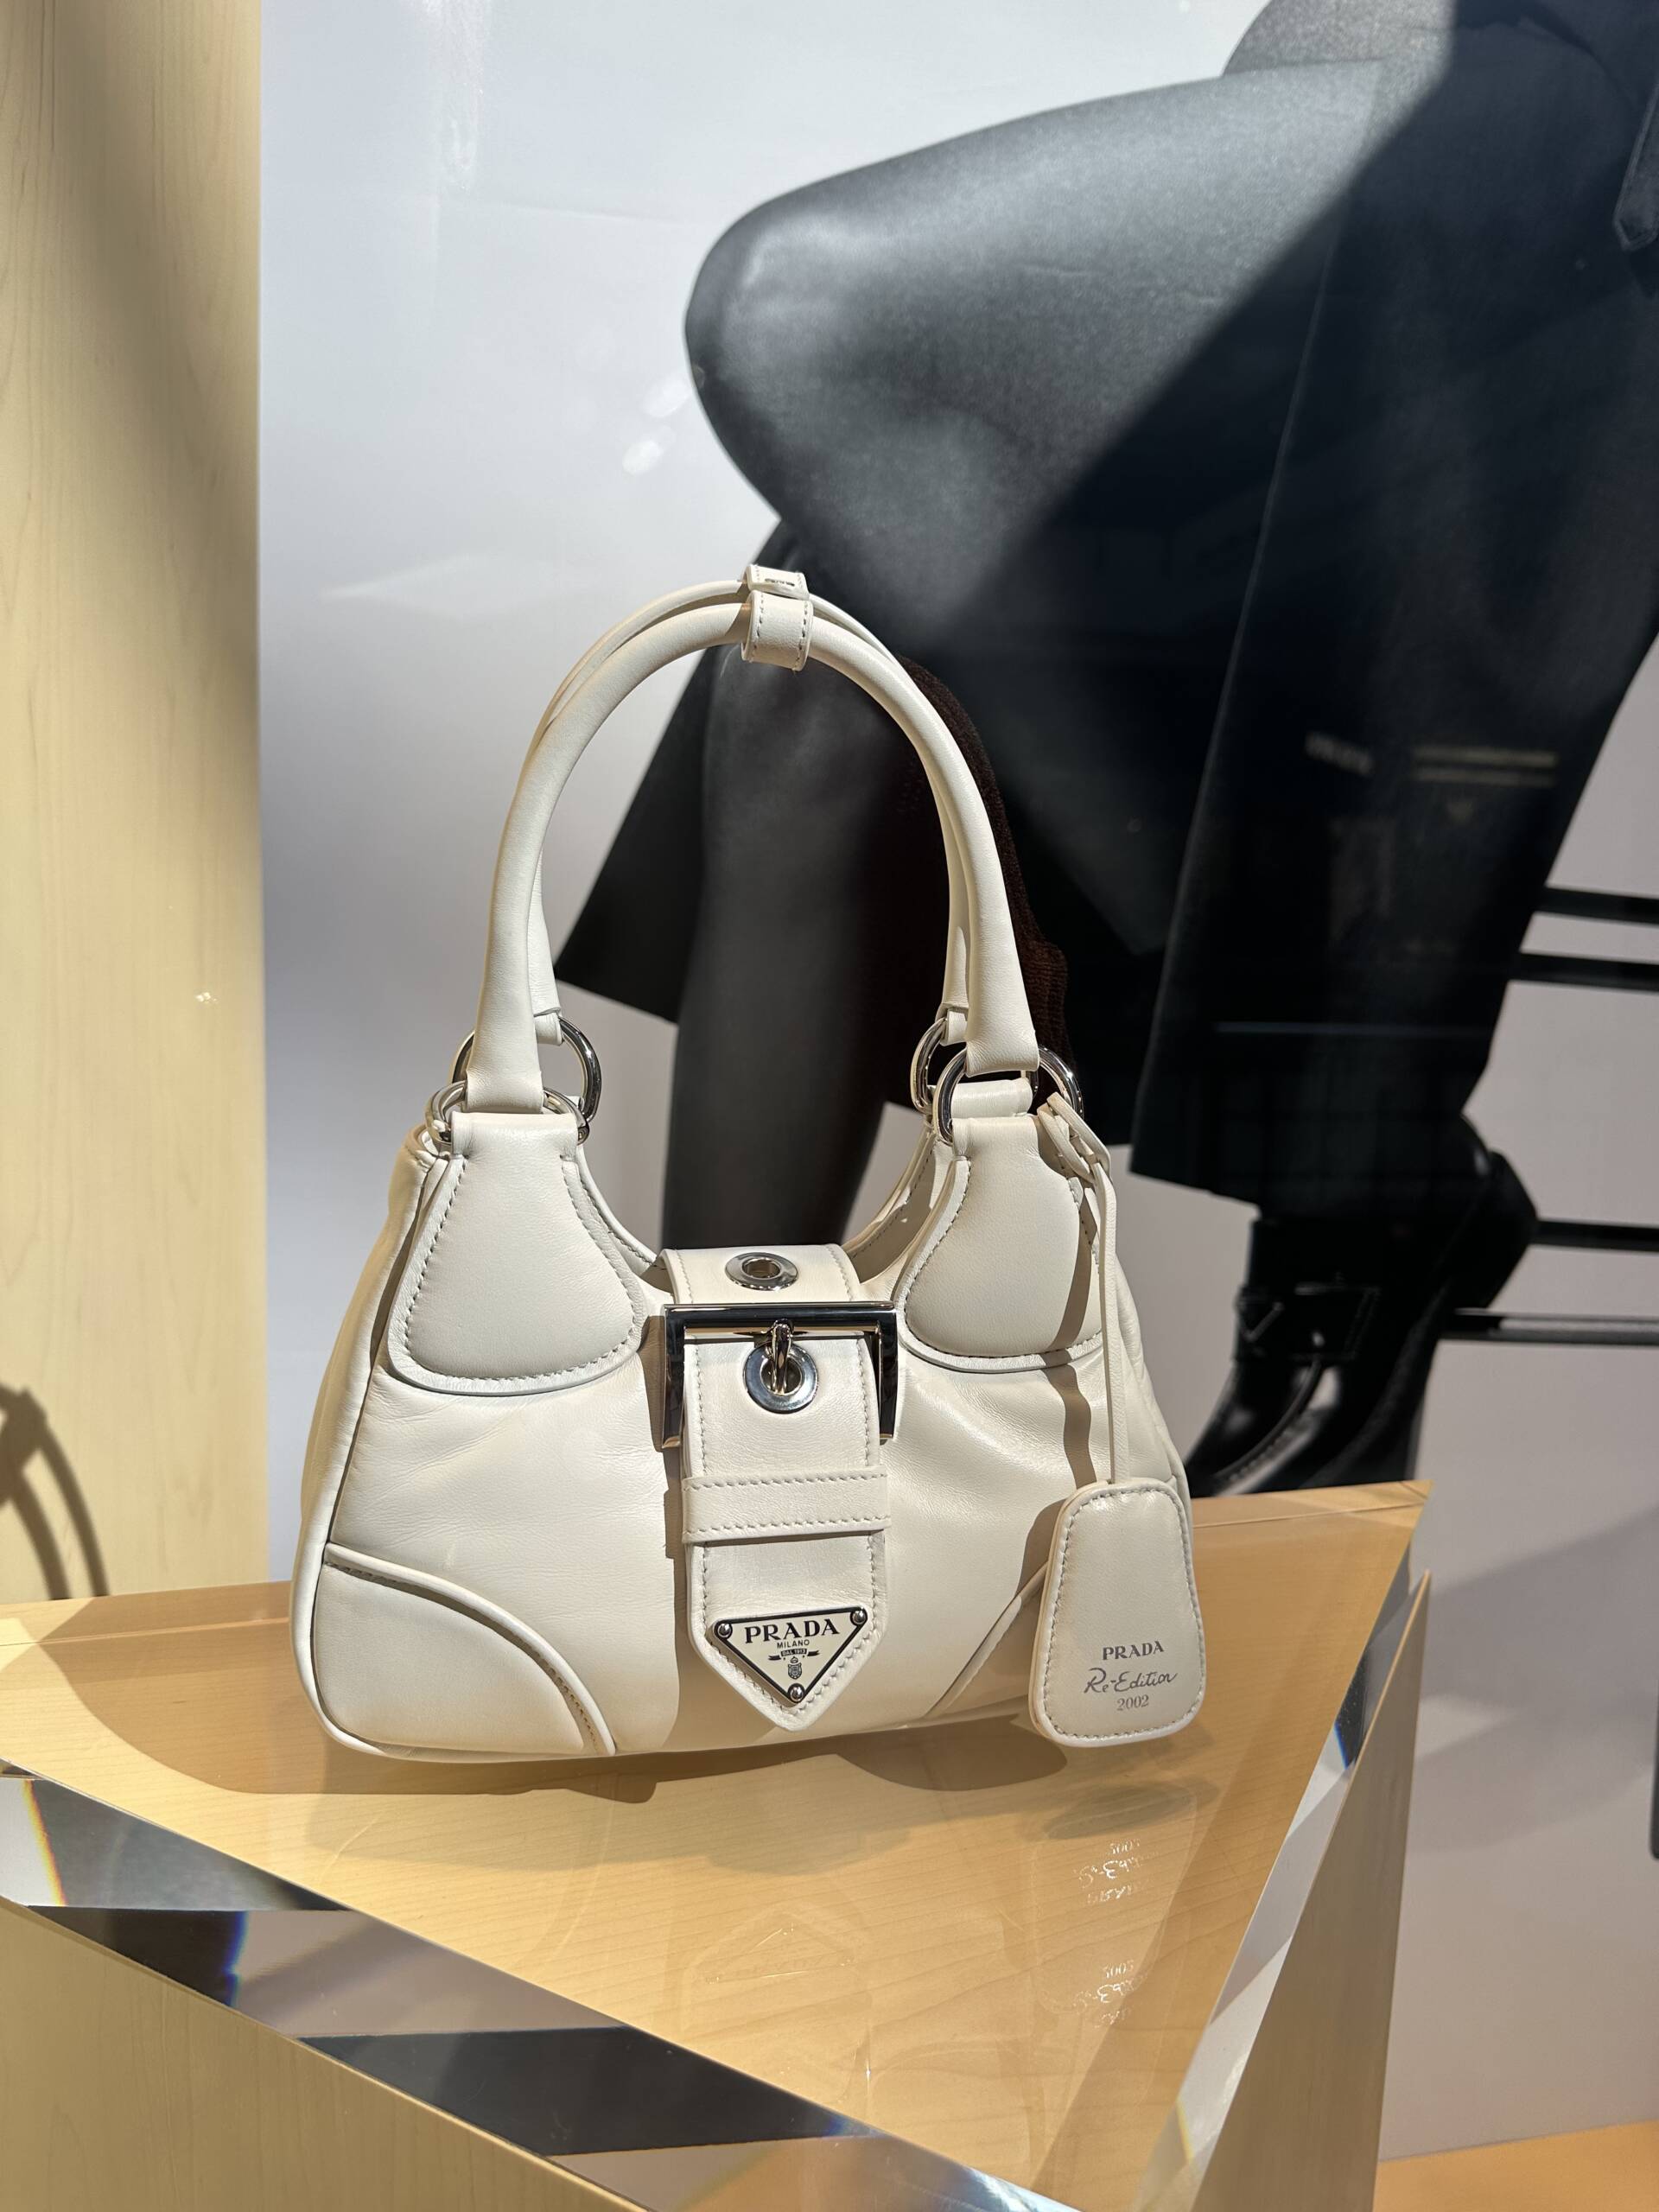 VINTAGE DESIGNER HANDBAG TRENDS FOR 2023  AFFORDABLE STYLES PREDICTED TO  BE ON TREND IN 2023 